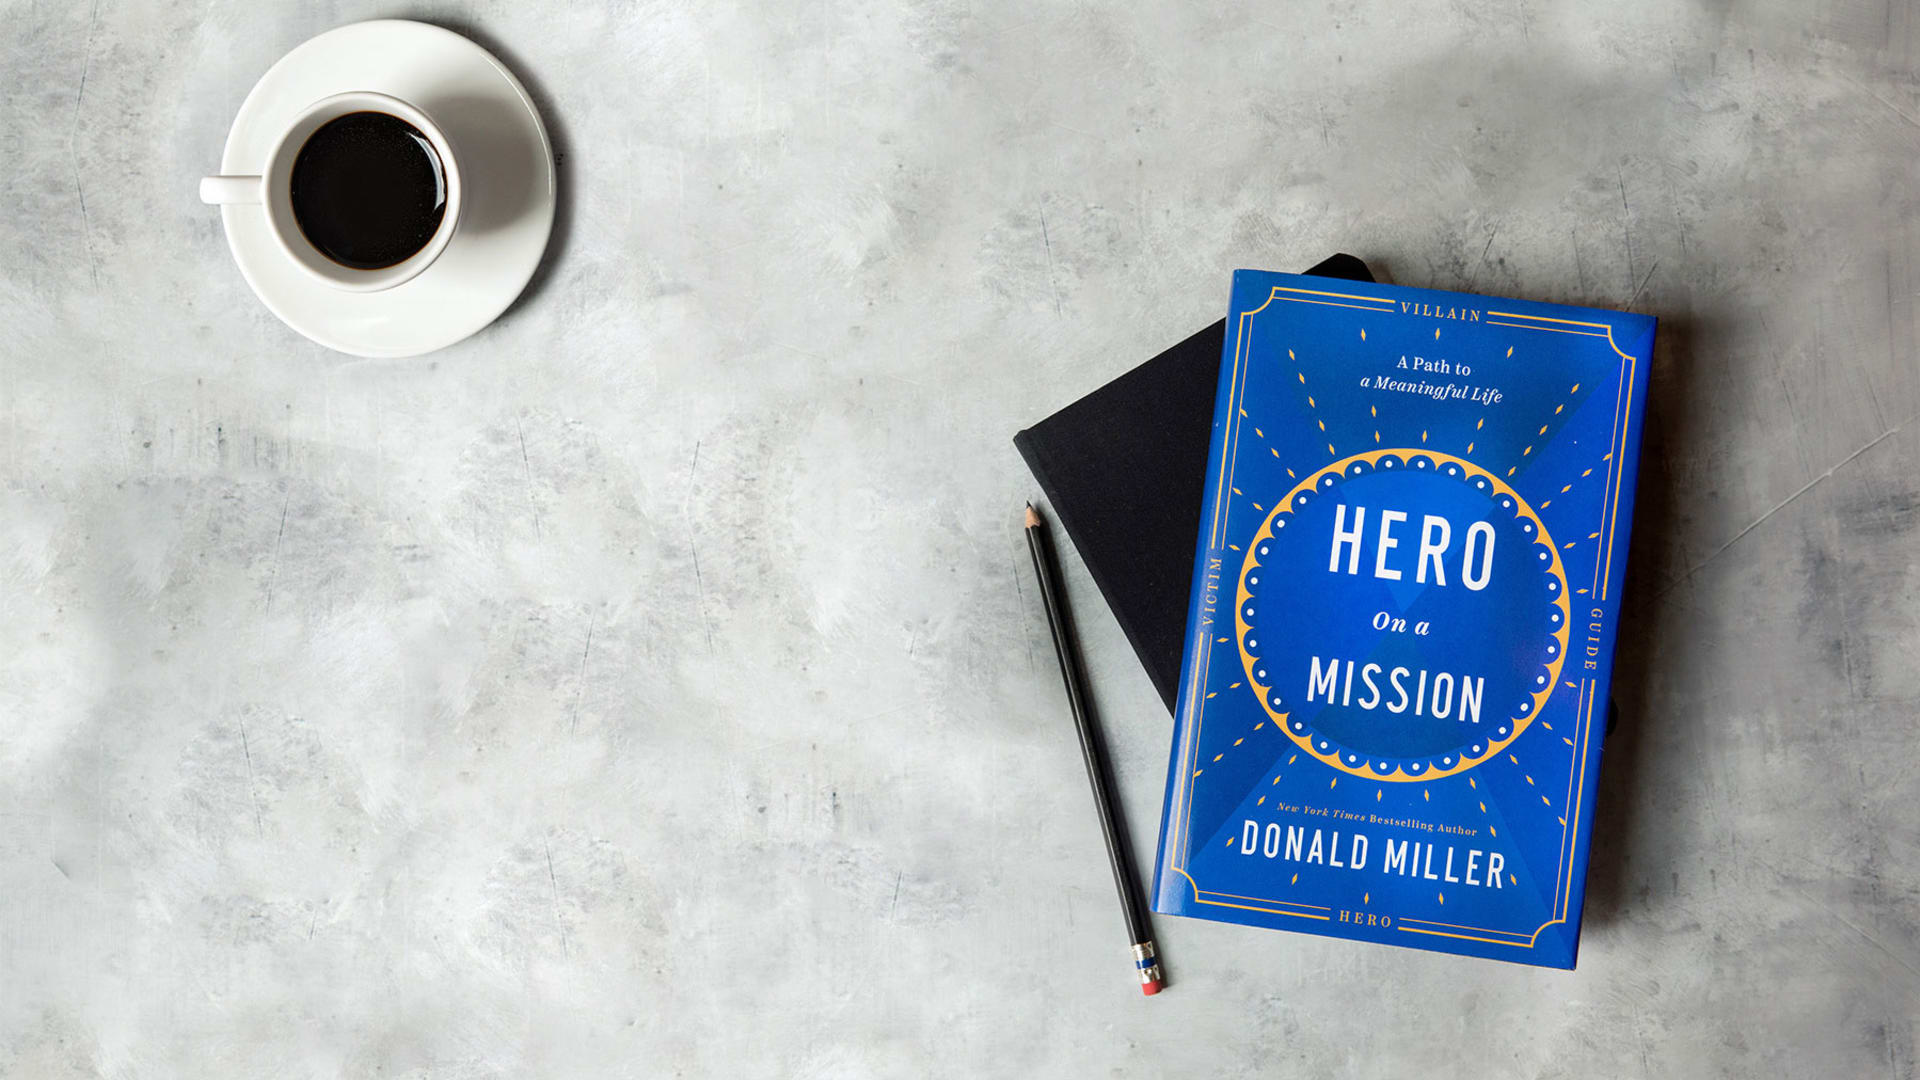 Want to Live a More Meaningful Life? This Book Says You Should Start by Writing Your Eulogy